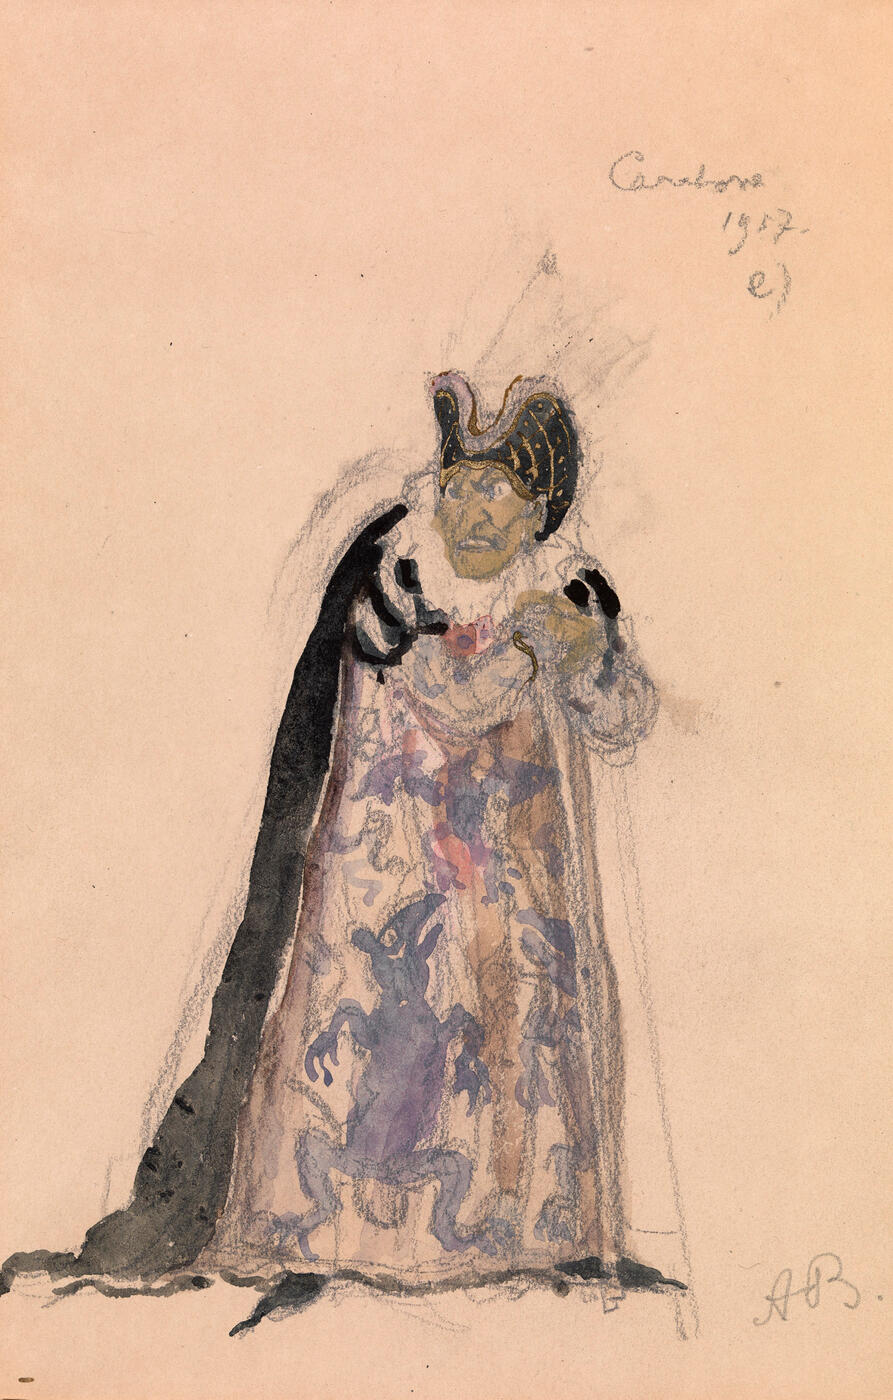 Costume Designs for the Wicked Fairy Godmother and the Mouse Pulling Her Wagon in “The Sleeping Beauty”